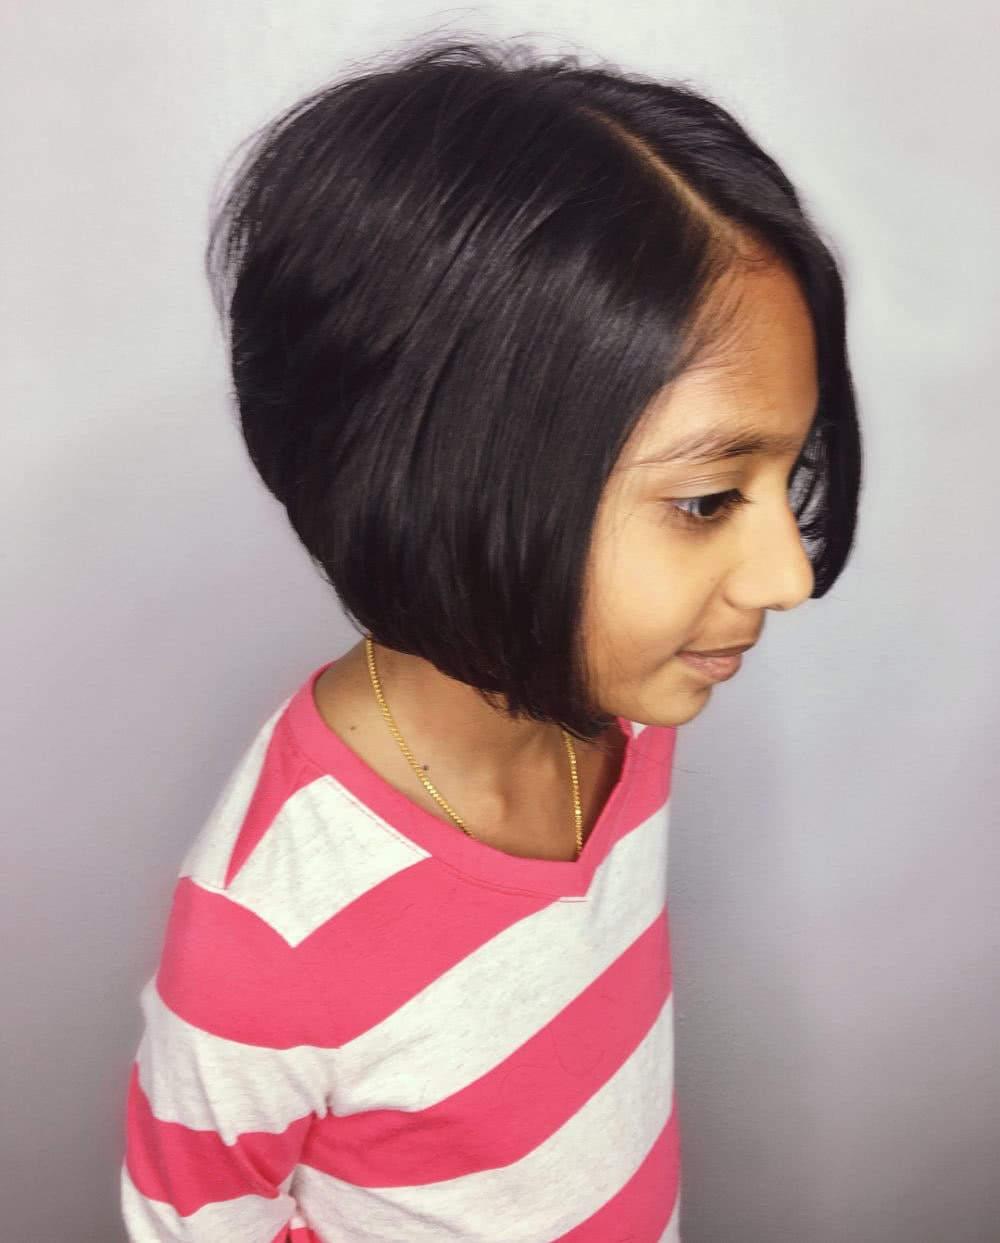 Fun Little Girl Hairstyles
 25 Cute and Adorable Little Girl Haircuts Haircuts